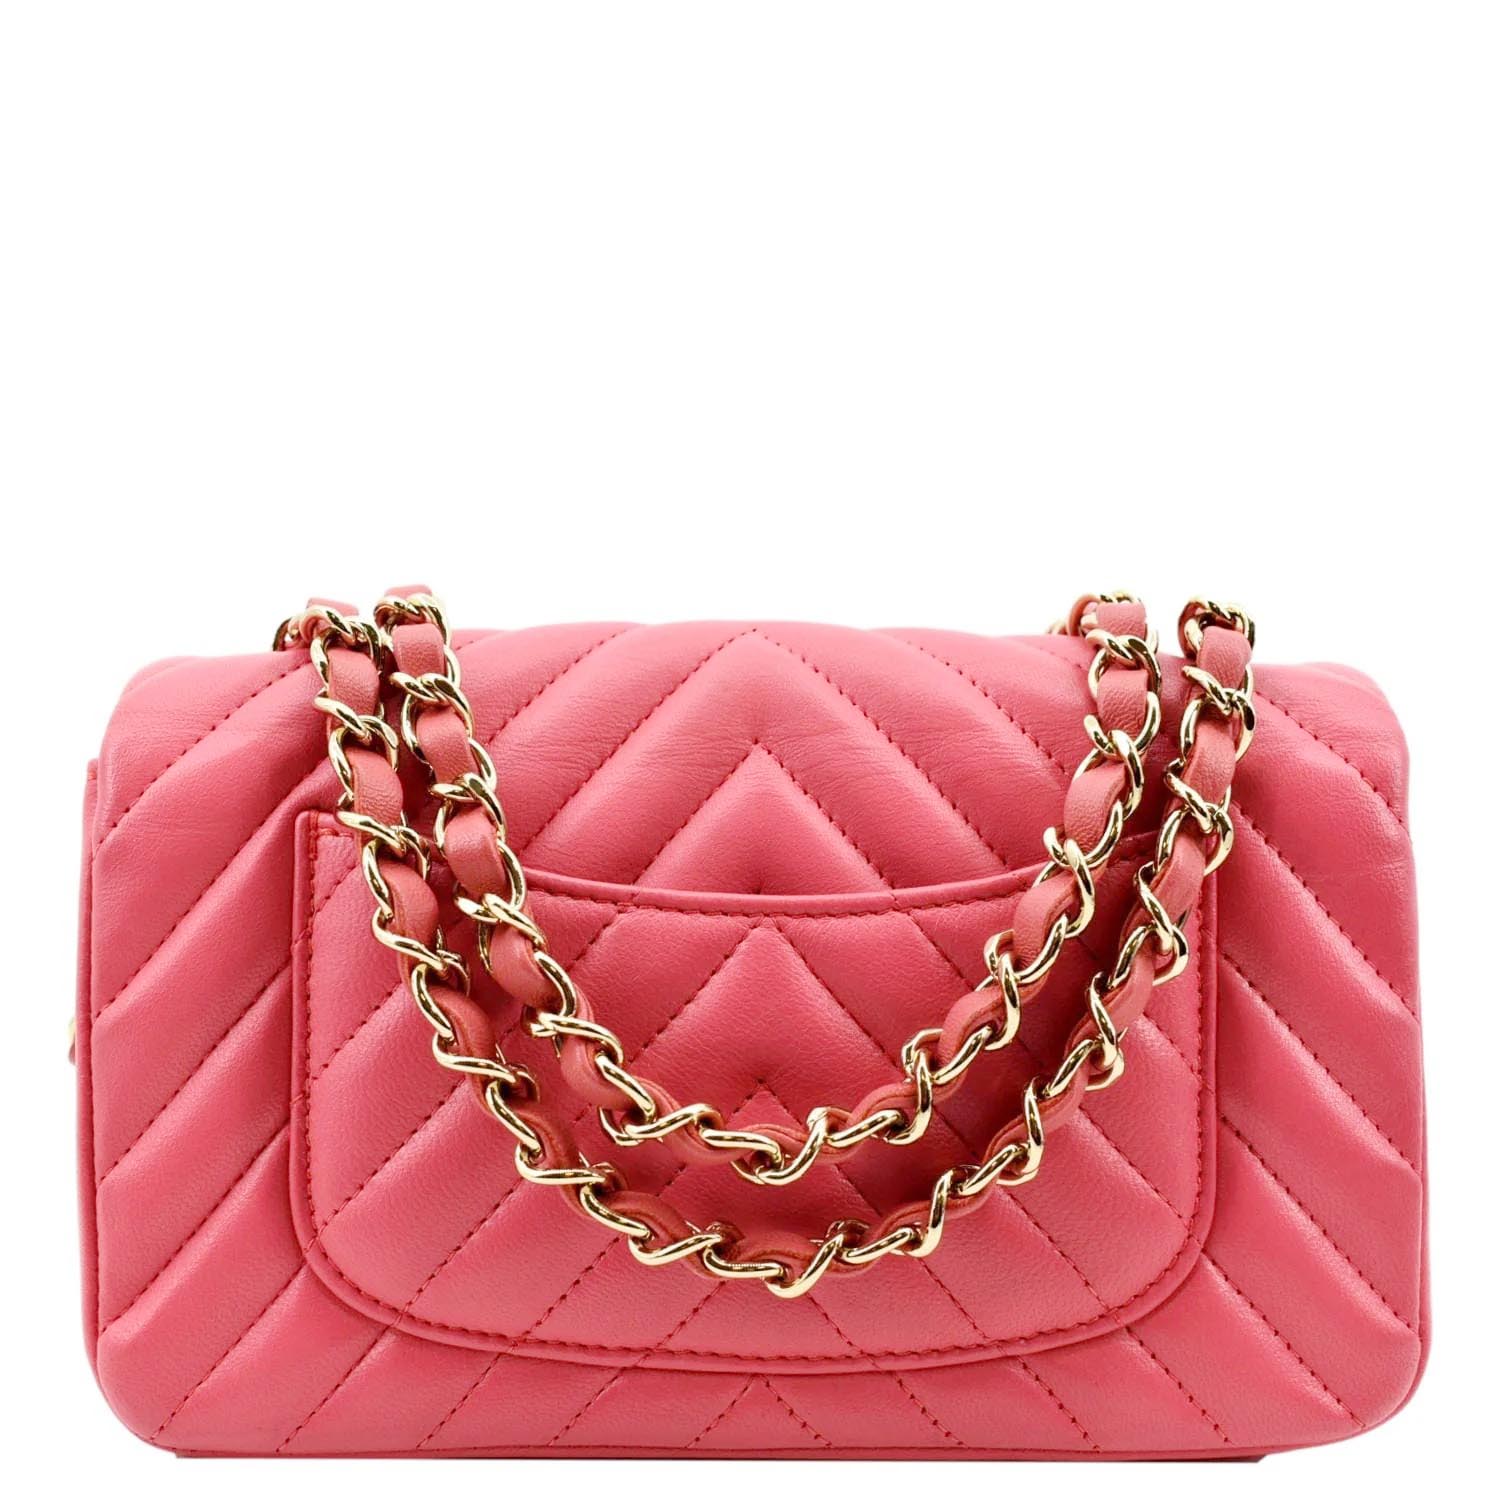 CHANEL CHANEL Timeless Small Bags & Handbags for Women, Authenticity  Guaranteed